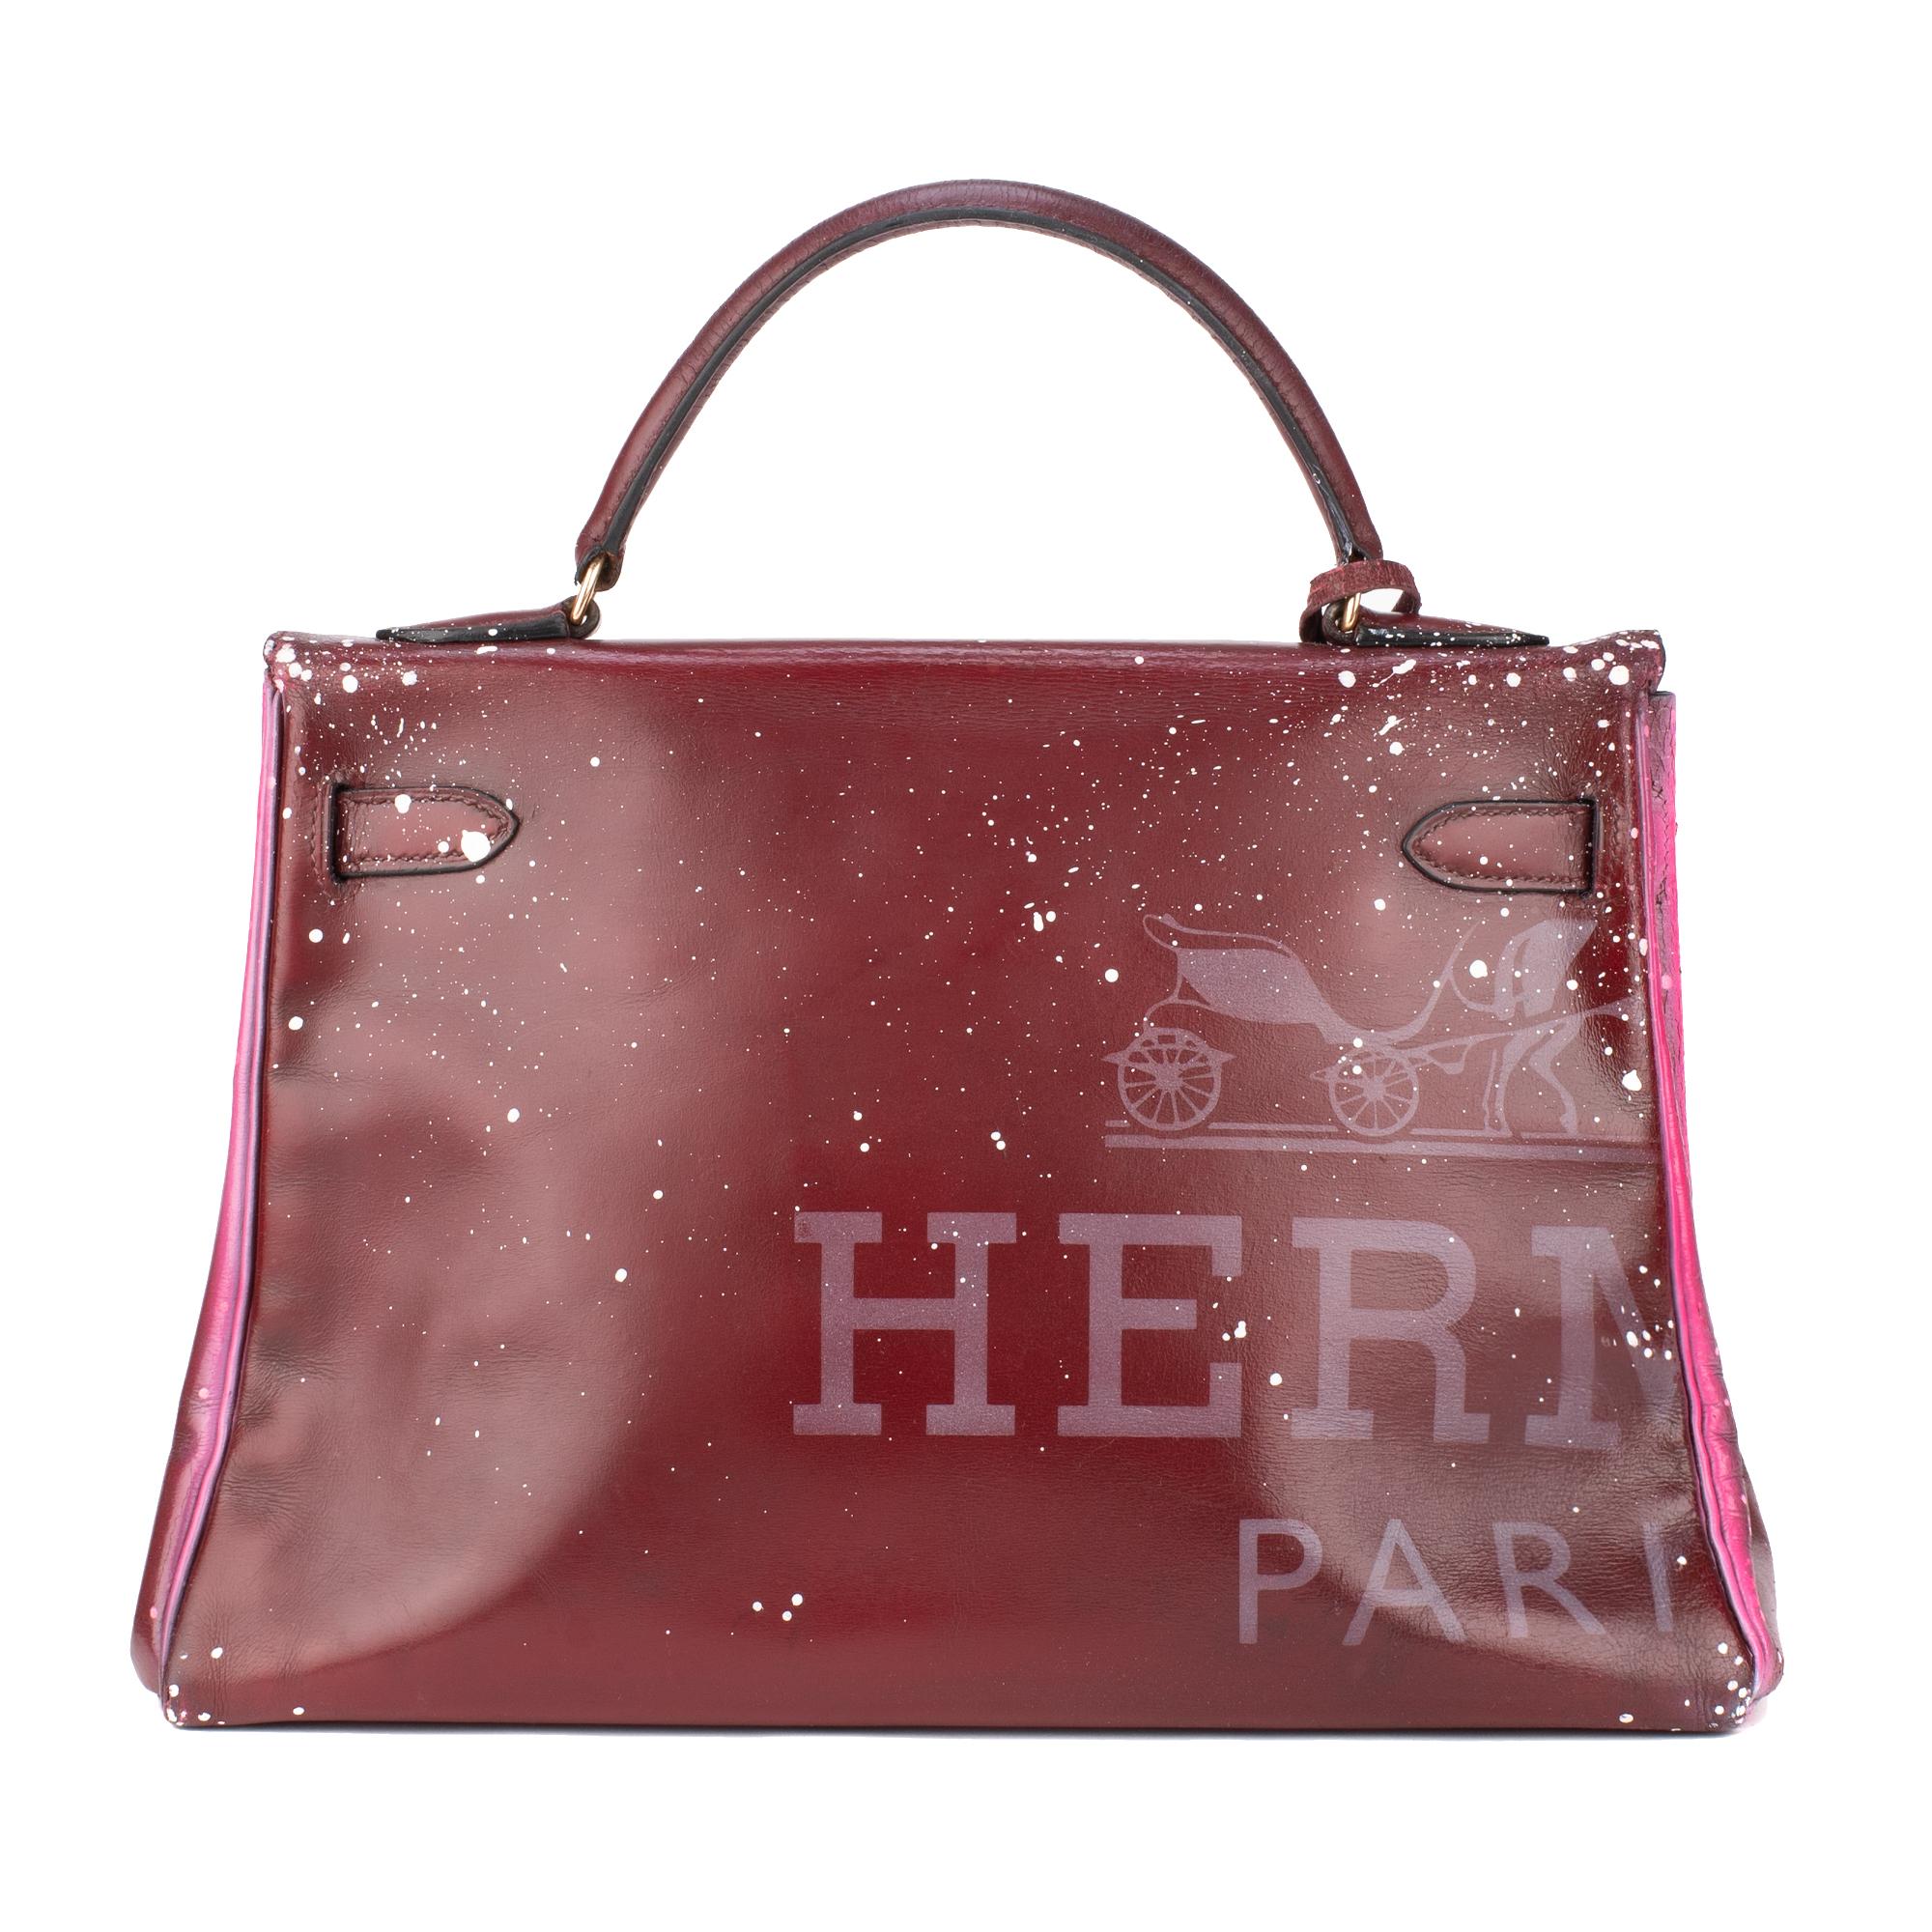 Very original handbag Hermes Kelly 32 cm in burgundy calfskin, gold plated metal trim, simple handle in burgundy calfskin allowing a handheld.
Closure by flap.
Interior lining in burgundy leather one zipped pocket, one double pocket